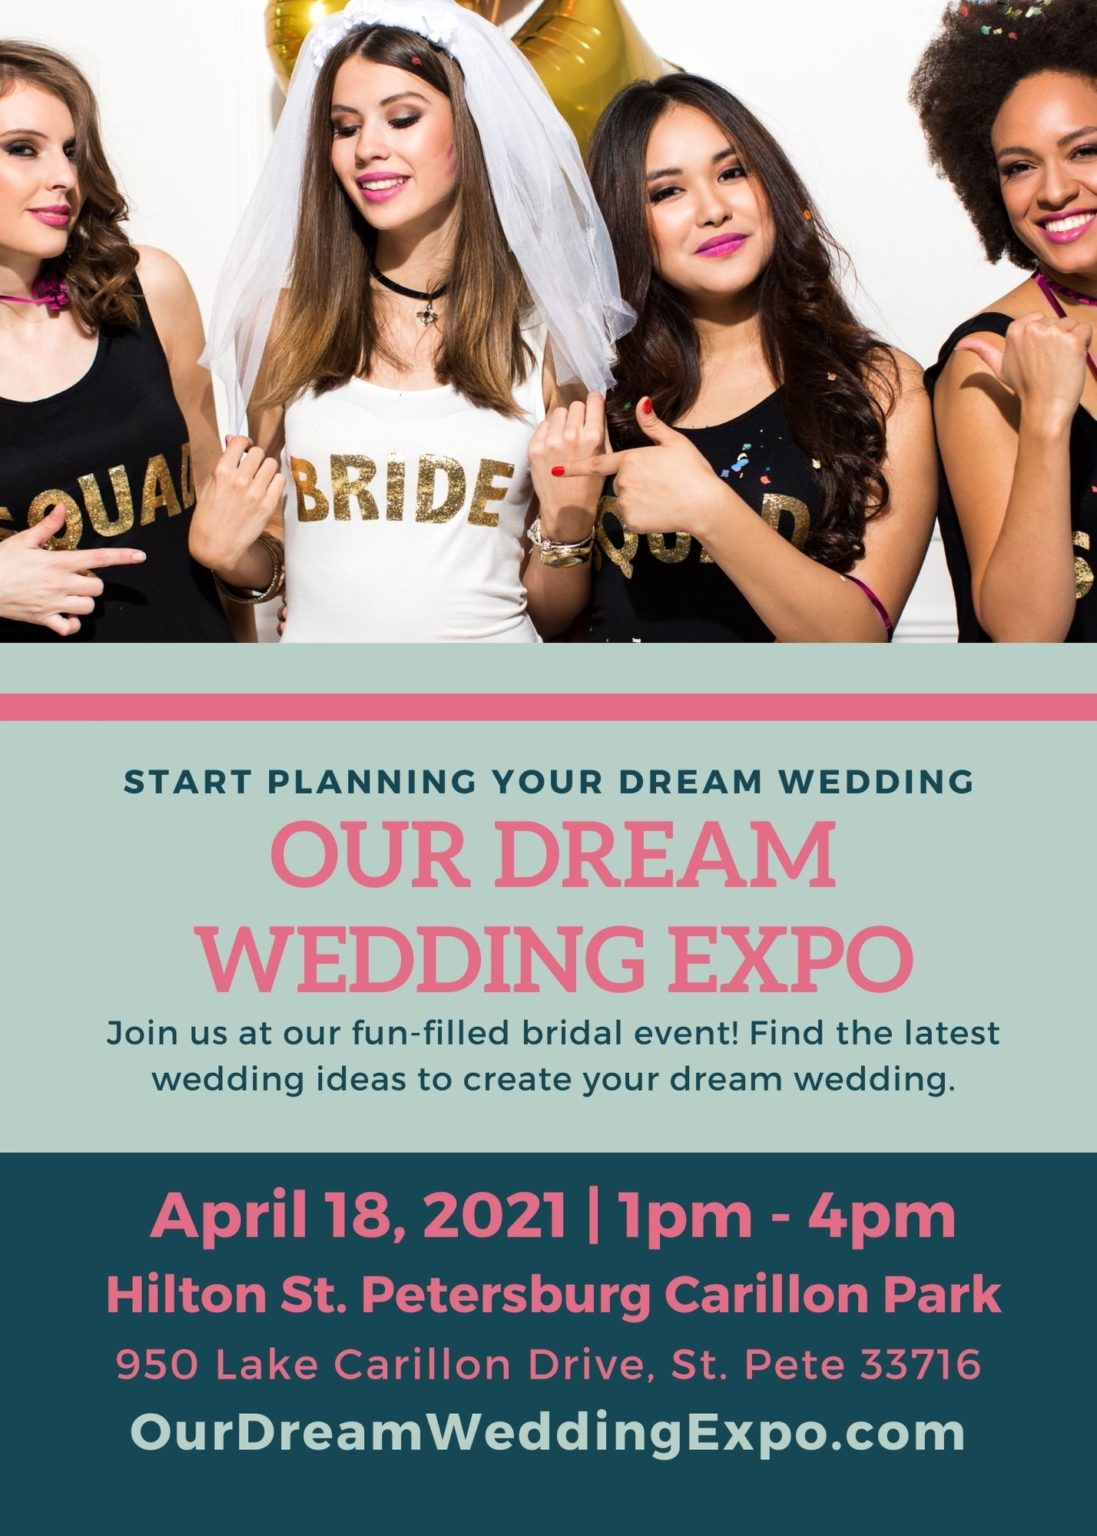 Our Dream Wedding Expo Complete Weddings + Events Tampa